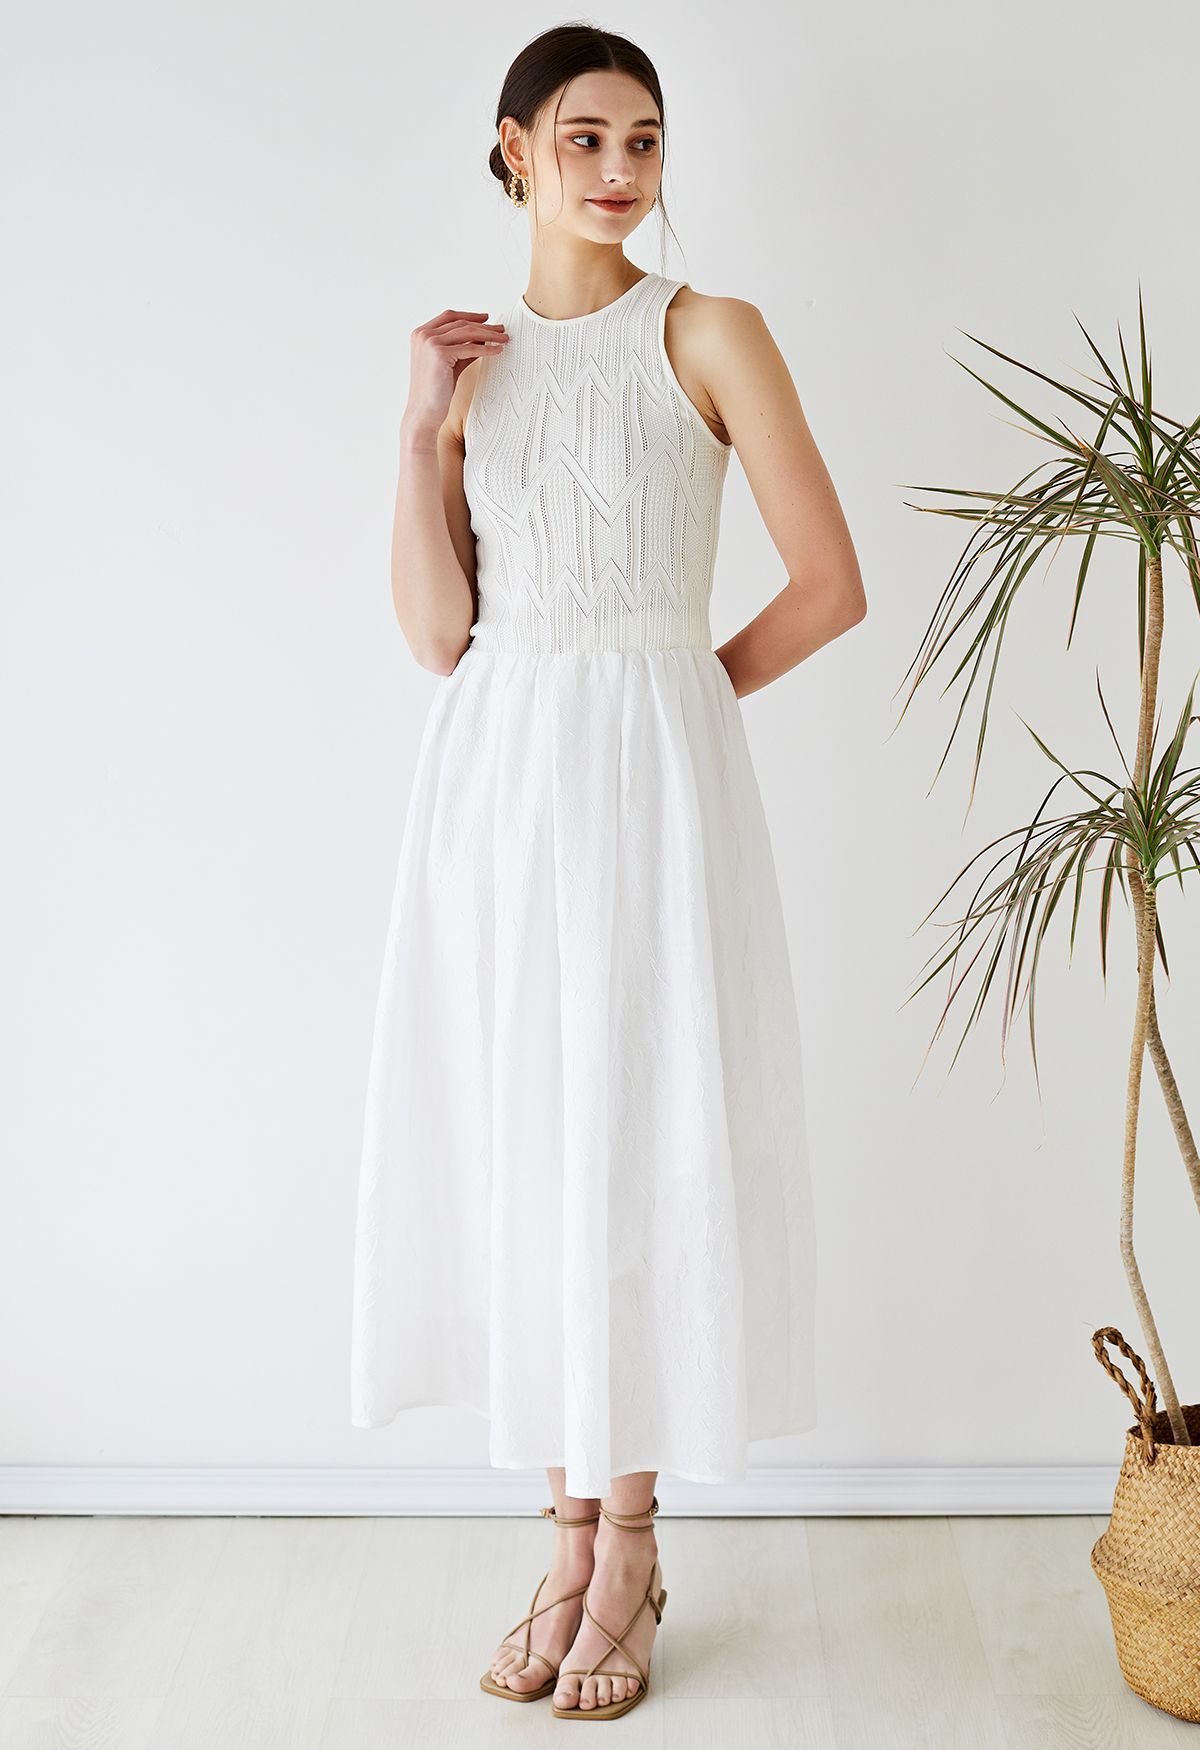 Knit Splicing Texture Sleeveless Dress in White | Chicwish